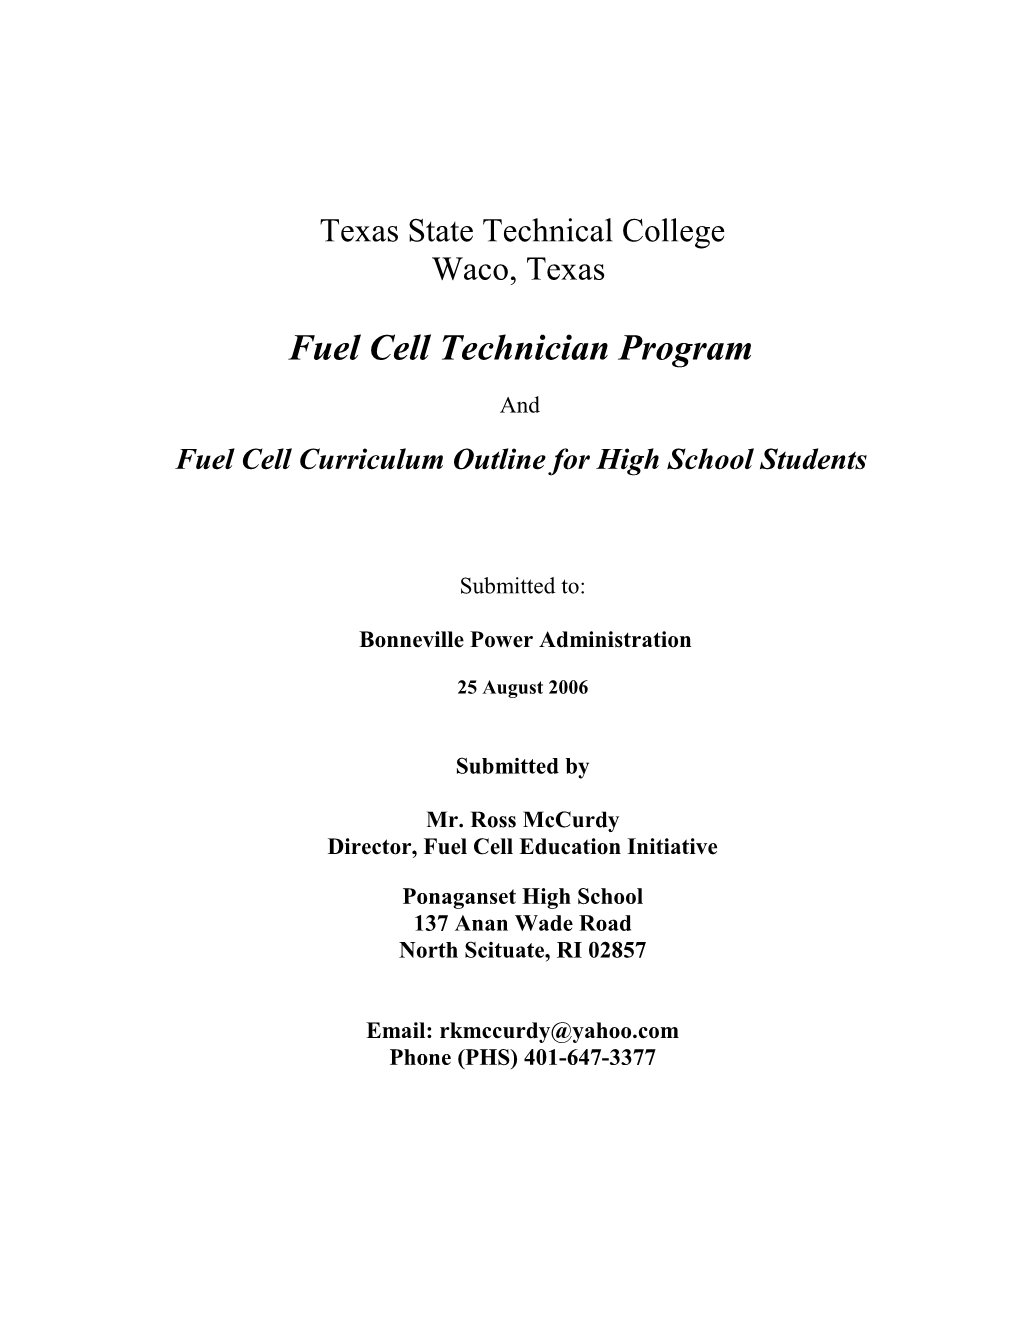 Fuel Cell Education Initiative